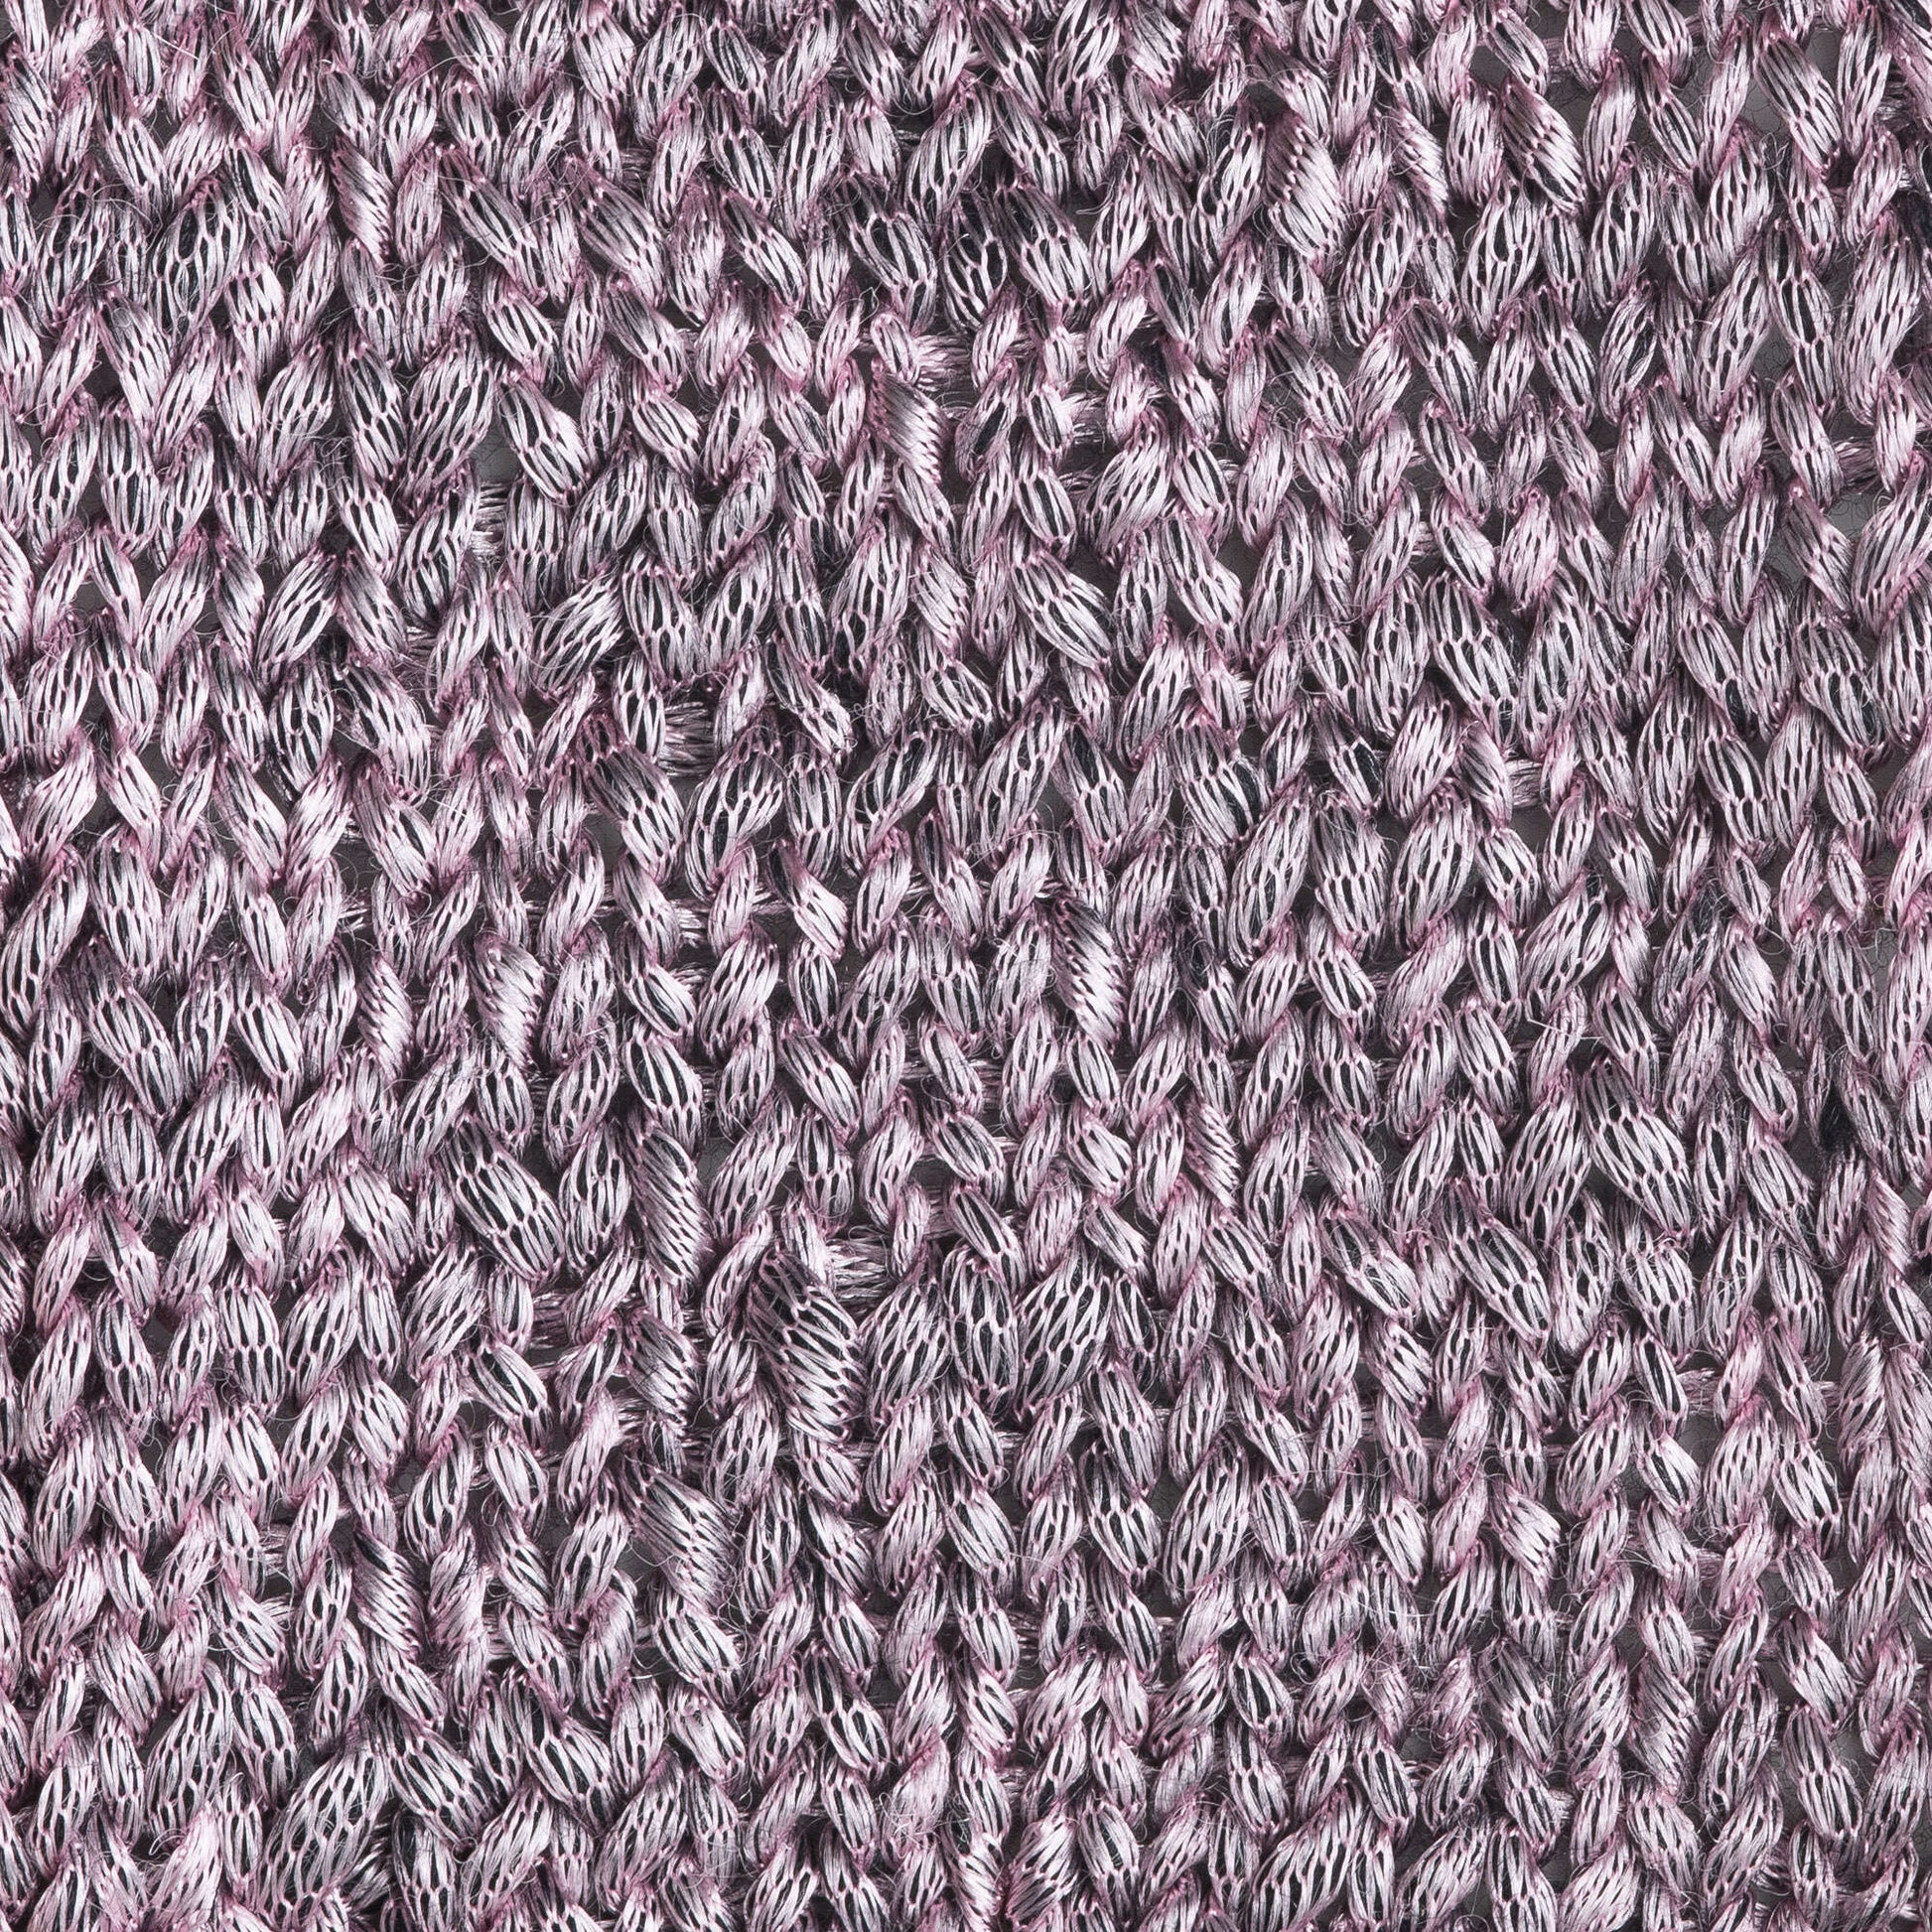 Patons Metallic Yarn - Discontinued Burnished Rose Gold